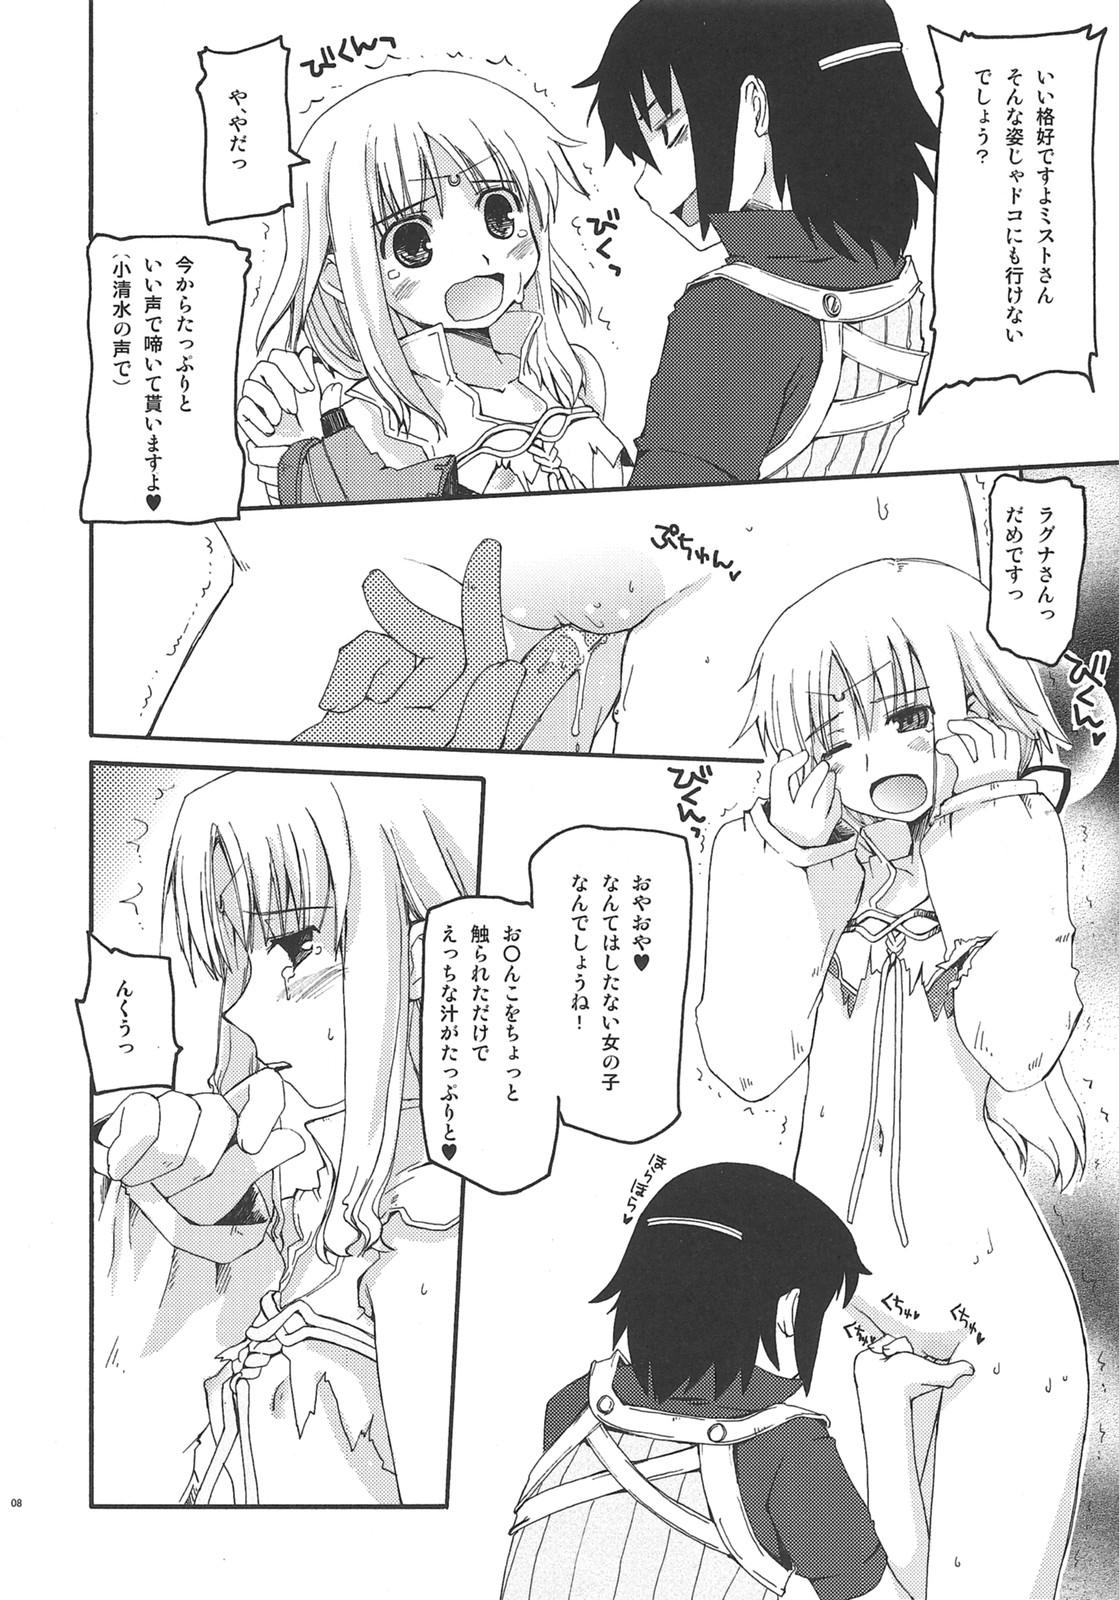 Assfingering Walking with strangers - Rune factory Groupfuck - Page 7